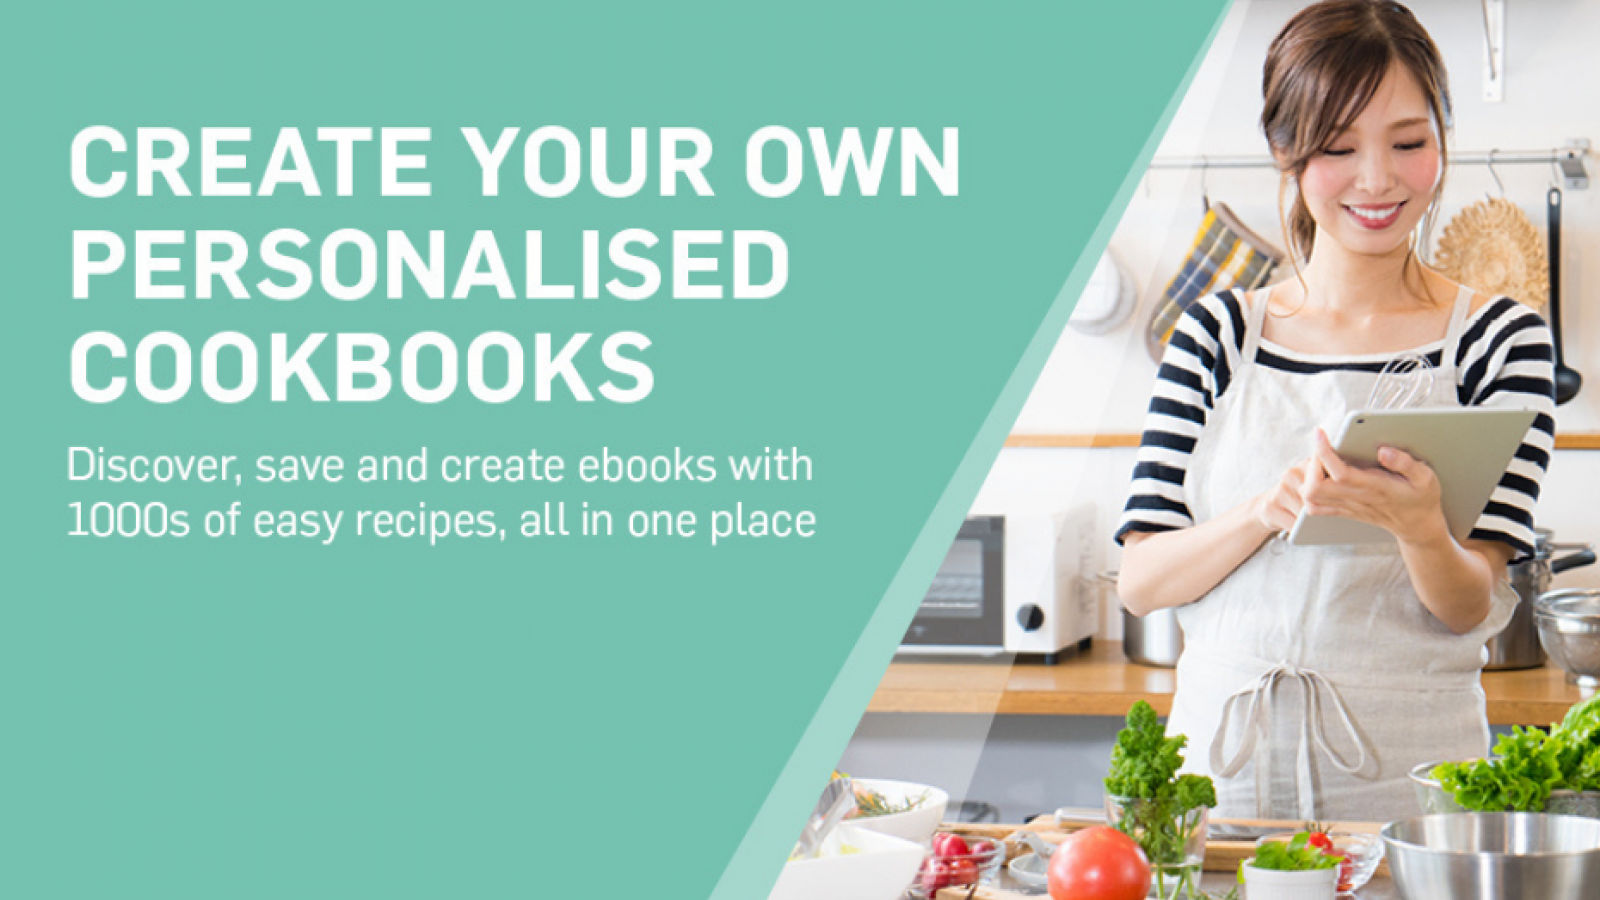 https://myfoodbook.com.au/sites/default/files/styles/16x9/public/collections_image/2022_carousel_promo_create_your_own_cookbooks.png